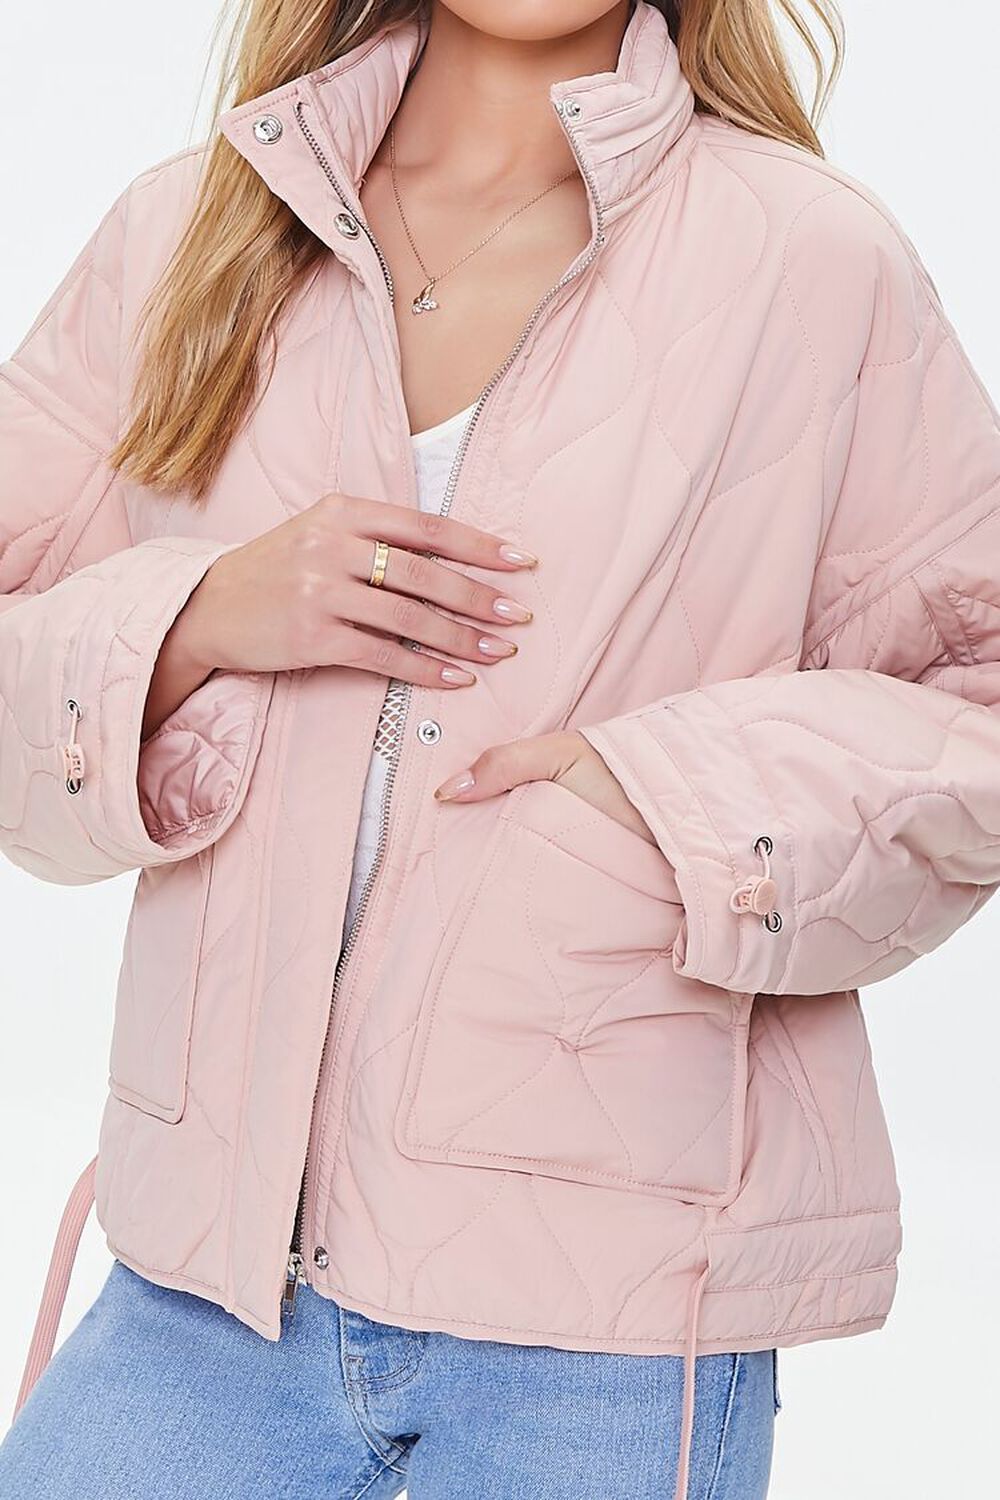 Forever 21 Women's Quilted Zip-Up Jacket